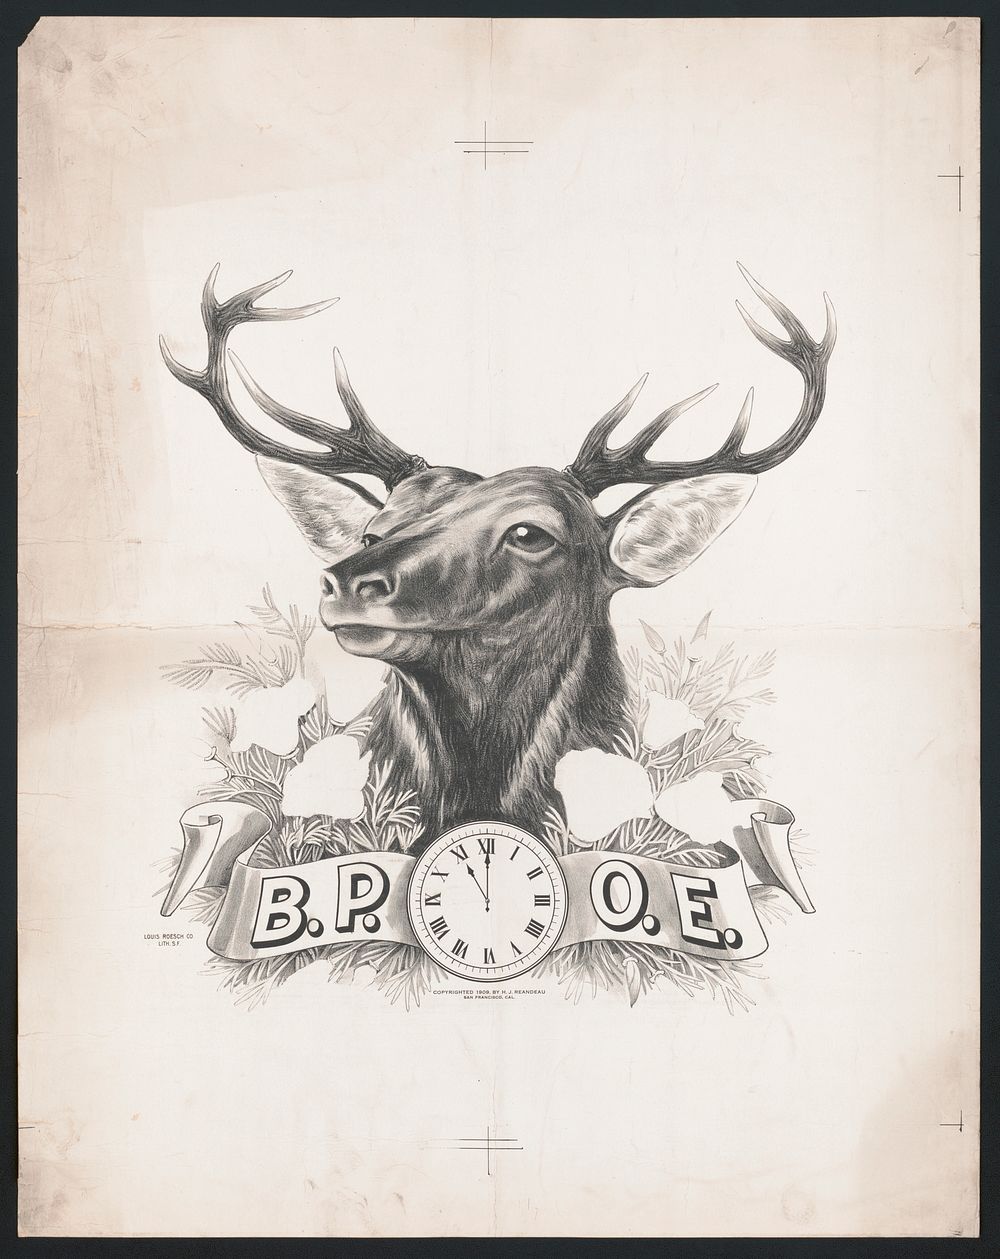 B. P. O. E. [Benevolent and Protective Order of Elks] (1909). Original from the Library of Congress.